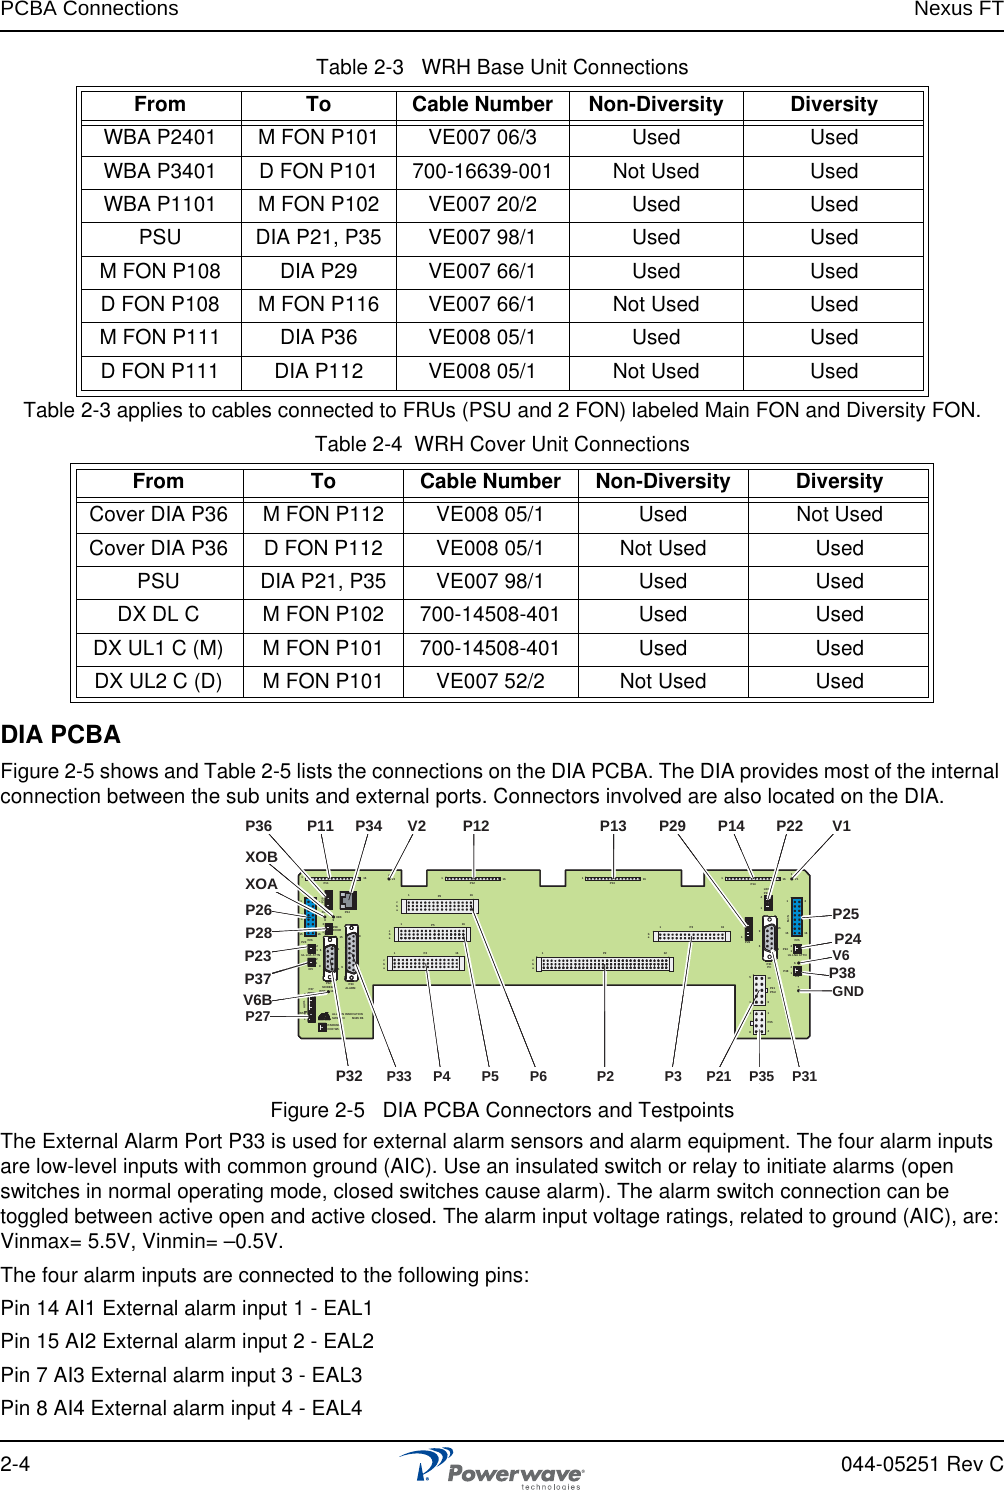 PCBA Connections Nexus FT2-4 044-05251 Rev CTable 2-3   WRH Base Unit ConnectionsTable 2-3 applies to cables connected to FRUs (PSU and 2 FON) labeled Main FON and Diversity FON.Table 2-4  WRH Cover Unit ConnectionsDIA PCBAFigure 2-5 shows and Table 2-5 lists the connections on the DIA PCBA. The DIA provides most of the internal connection between the sub units and external ports. Connectors involved are also located on the DIA. Figure 2-5   DIA PCBA Connectors and TestpointsThe External Alarm Port P33 is used for external alarm sensors and alarm equipment. The four alarm inputs are low-level inputs with common ground (AIC). Use an insulated switch or relay to initiate alarms (open switches in normal operating mode, closed switches cause alarm). The alarm switch connection can be toggled between active open and active closed. The alarm input voltage ratings, related to ground (AIC), are: Vinmax= 5.5V, Vinmin= –0.5V.The four alarm inputs are connected to the following pins:Pin 14 AI1 External alarm input 1 - EAL1Pin 15 AI2 External alarm input 2 - EAL2Pin 7 AI3 External alarm input 3 - EAL3Pin 8 AI4 External alarm input 4 - EAL4From To Cable Number Non-Diversity DiversityWBA P2401 M FON P101 VE007 06/3 Used UsedWBA P3401 D FON P101 700-16639-001 Not Used UsedWBA P1101 M FON P102 VE007 20/2 Used UsedPSU DIA P21, P35 VE007 98/1 Used UsedM FON P108 DIA P29 VE007 66/1 Used UsedD FON P108 M FON P116 VE007 66/1 Not Used UsedM FON P111 DIA P36 VE008 05/1 Used UsedD FON P111 DIA P112 VE008 05/1 Not Used UsedFrom To Cable Number Non-Diversity DiversityCover DIA P36 M FON P112 VE008 05/1 Used Not UsedCover DIA P36 D FON P112 VE008 05/1 Not Used UsedPSU DIA P21, P35 VE007 98/1 Used UsedDX DL C M FON P102 700-14508-401 Used UsedDX UL1 C (M) M FON P101 700-14508-401 Used UsedDX UL2 C (D) M FON P101 VE007 52/2 Not Used UsedALLGON INNO VATIONSWEDEN         M105 R61PARKINGFOR W5W58P27 W6B 101P33ALARMP23UL LNA ATT NP32MODEMAUX1P28DOOR596111611M-&gt;SP11P348915P2615 16S-&gt;M12389P365X0AX0B2V2 116P12 P13111161616P4P5P6cbacbacbacba1P2321ba116P316 116P141V111111461156915216124585P35P21PSU610P31PCP29P24P25GND76V6UL LNA ATTNLEDP2212V6BP26XOAXOBP28P4 P5 P6 P2 P3 P31 P21  P35 P33P32P11 P12 P13 V1P14 P22P29P34 V2P36V6GNDP25P24P27P2312P37DIV 12P38DIVP38ALLGON INNO VATIONSWEDEN         M105 R61PARKINGFOR W5W58P27 W6B 101P33ALARMP23UL LNA ATT NP32MODEMAUX1P28DOOR596111611M-&gt;SP11P348915P2615 16S-&gt;M12389P365X0AX0B2V2 116P12 P13111161616P4P5P6cbacbacbacba1P2321ba116P316 116P141V111111461156915216124585P35P21PSU610P31PCP29P24P25GND76V6UL LNA ATTNLEDP2212V6BP26XOAXOBP28P4 P5 P6 P2 P3 P31 P21  P35 P33P32P11 P12 P13 V1P14 P22P29P34 V2P36V6GNDP25P24P27P2312P37DIV 12P38DIVP38